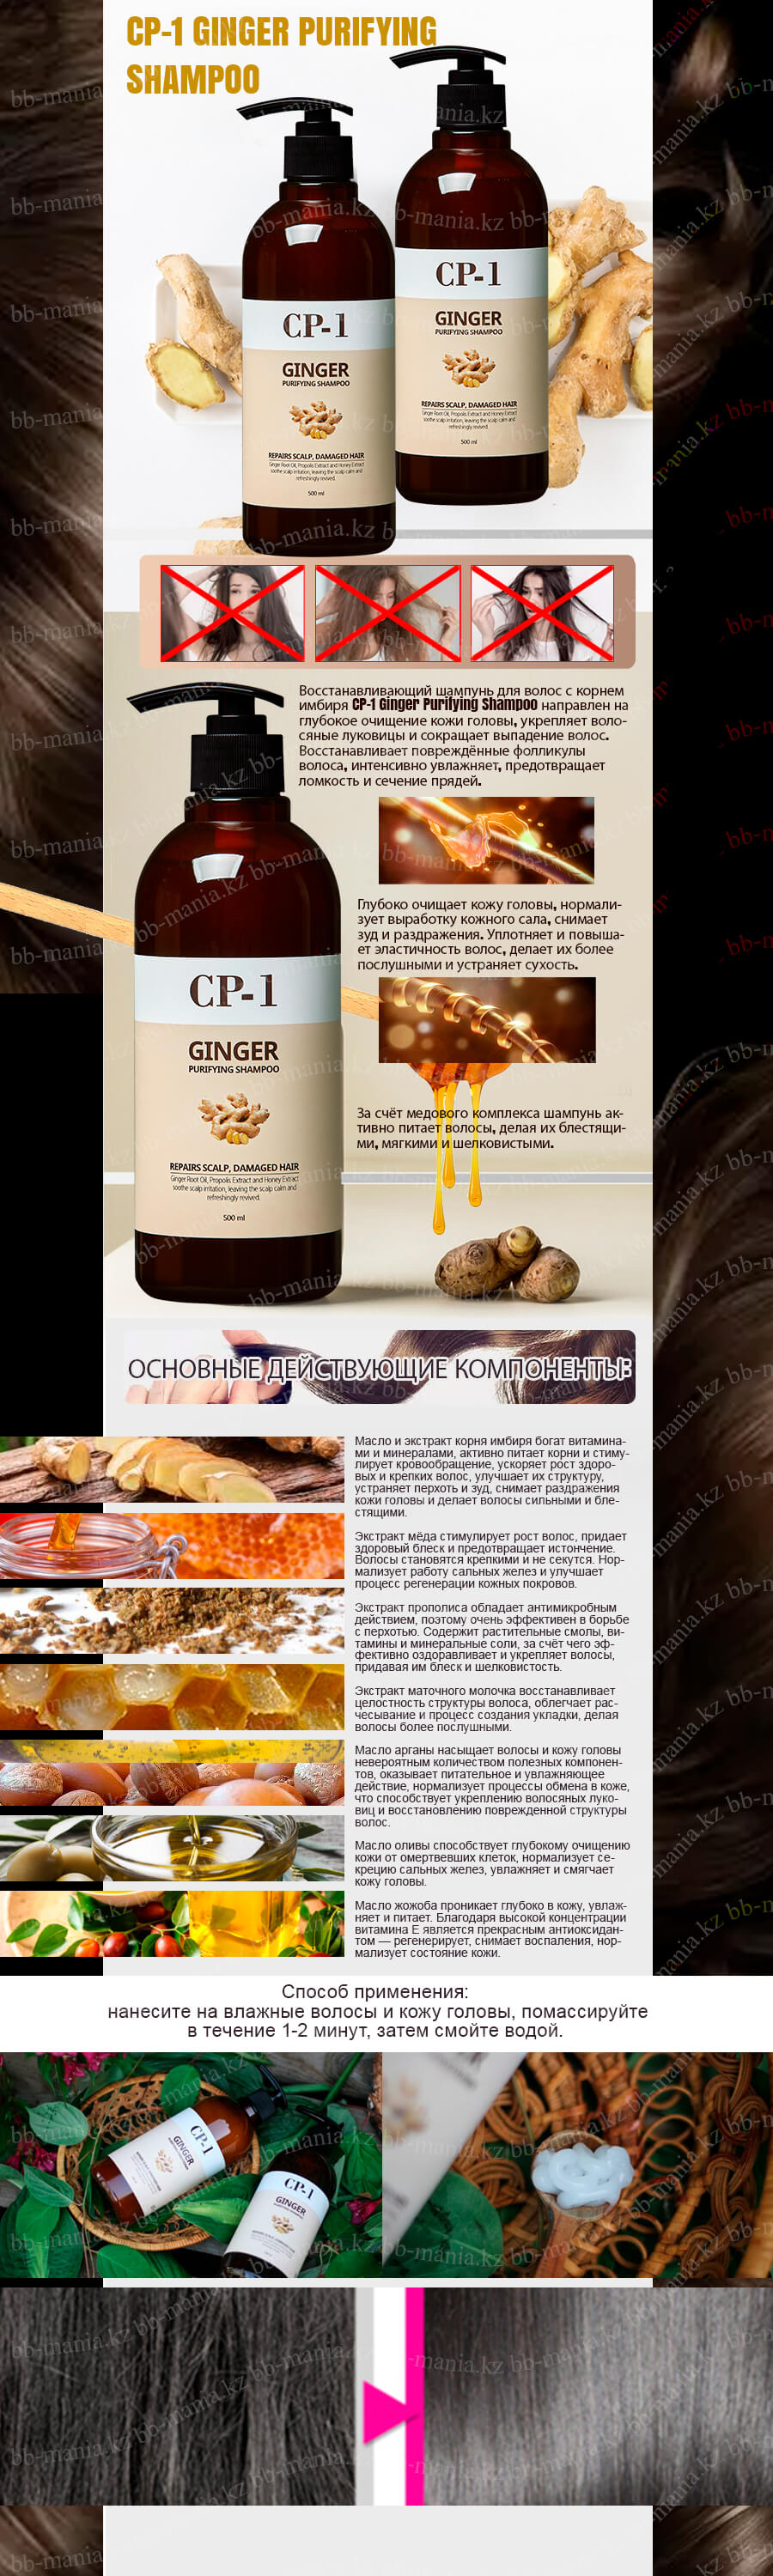 CP-1-Ginger-Purifying-Shampoo-[Esthetic-House] (1)